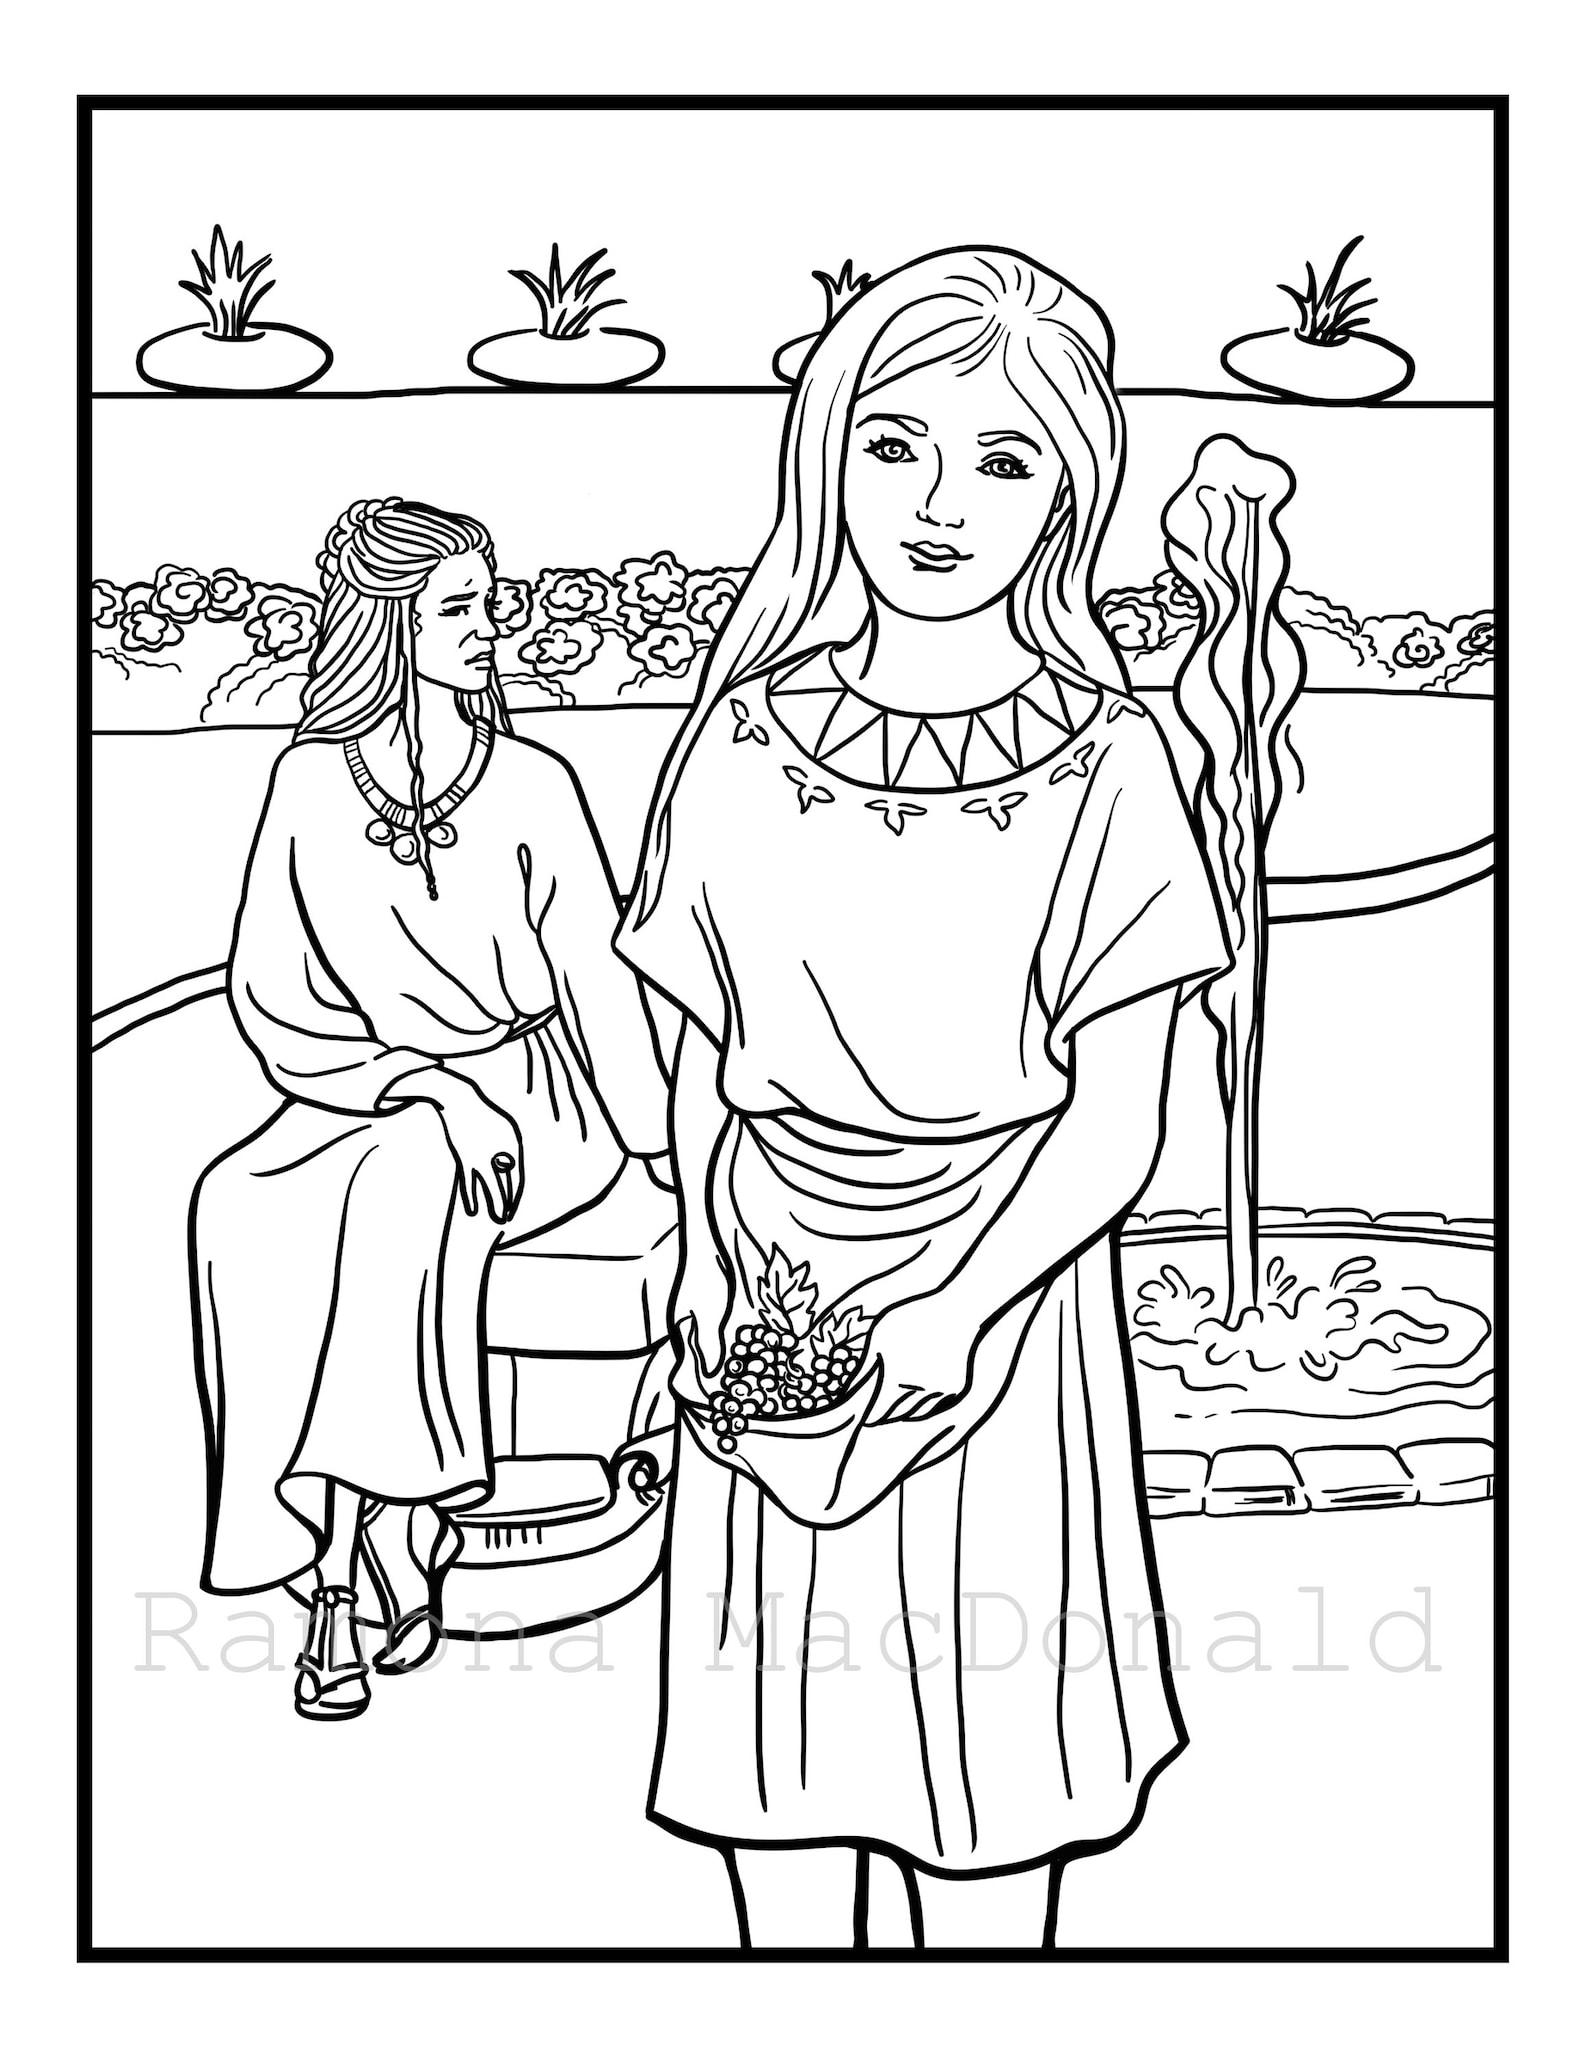 Little Maid and Naaman's Wife Printable Coloring Pages | Etsy